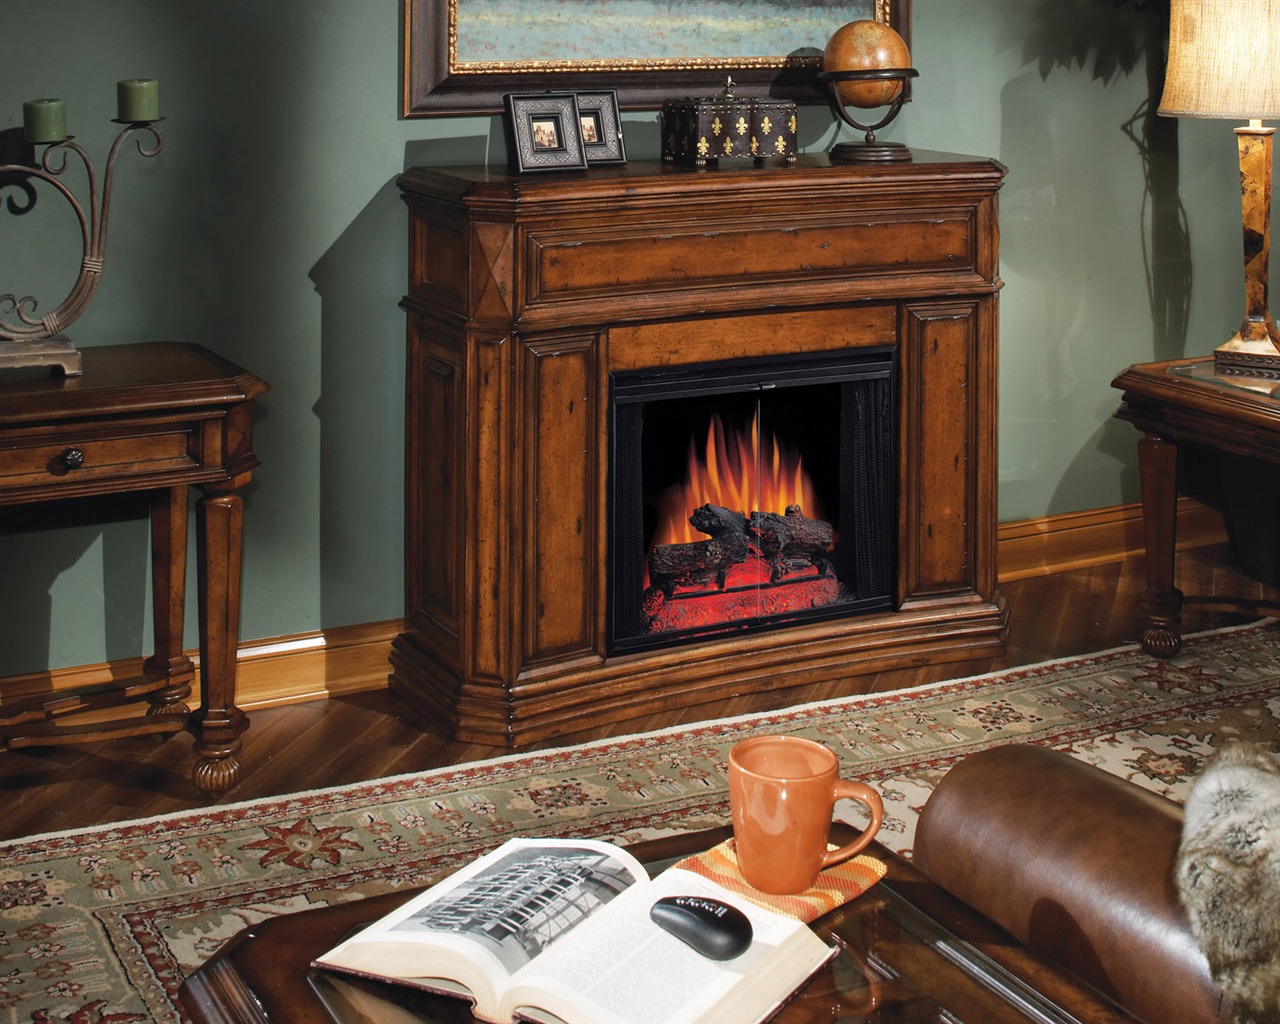 Western-style family fireplace wallpaper (1) #6 - 1280x1024